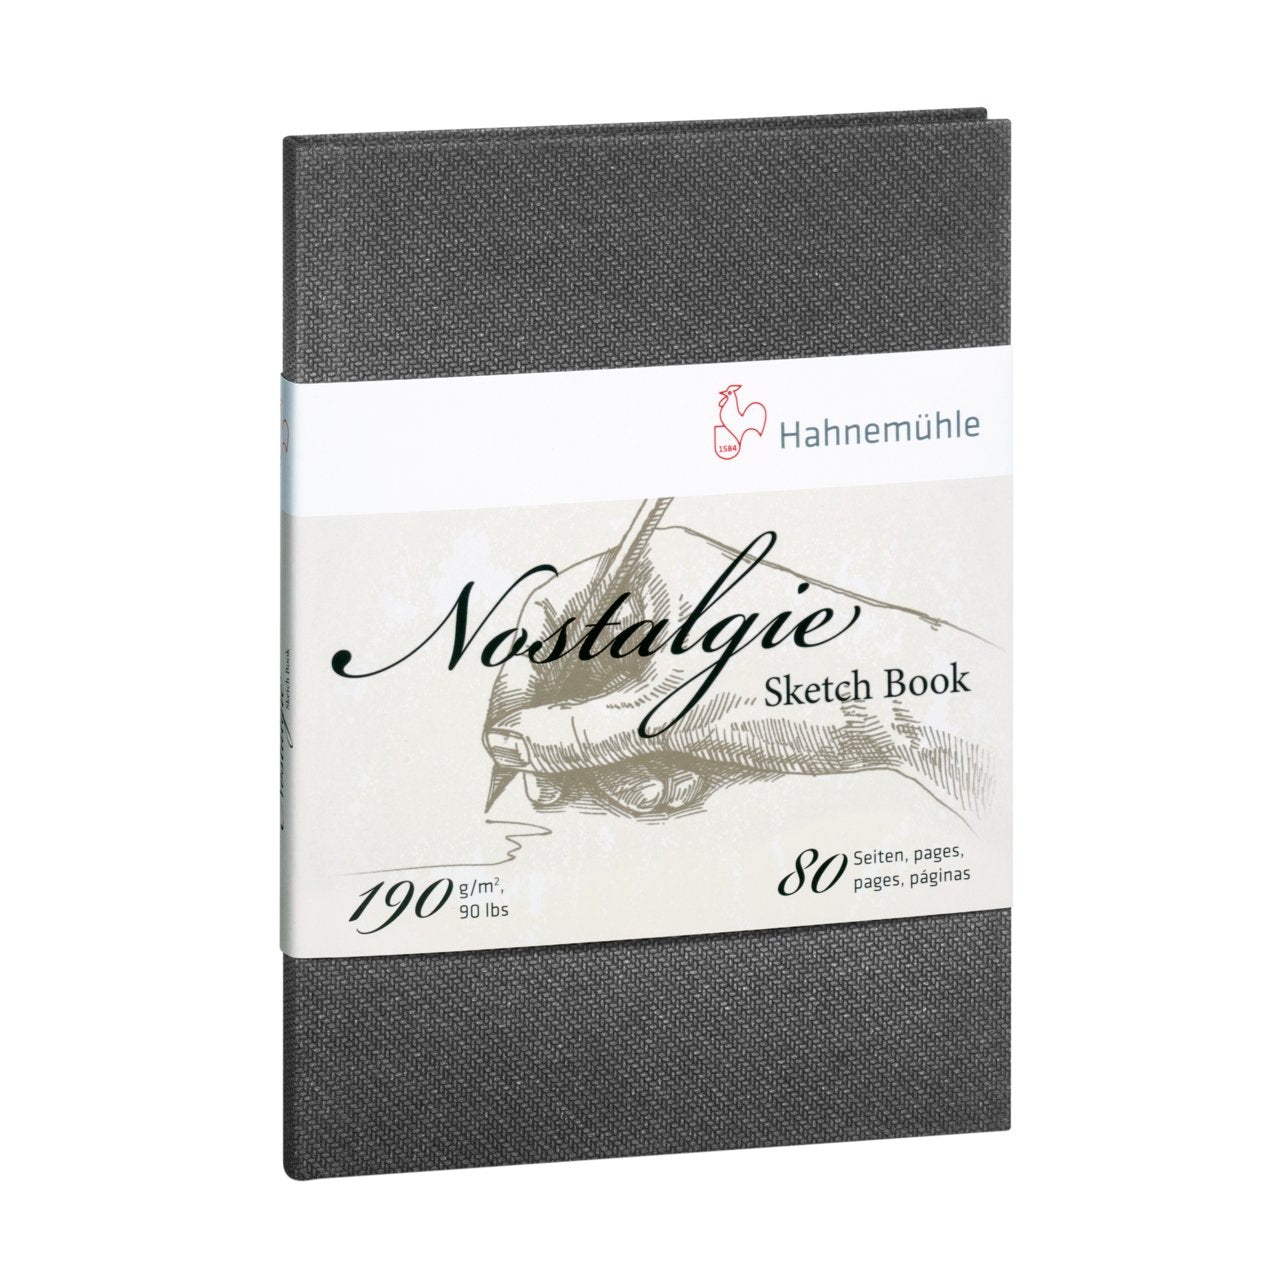 Hahnemuehle Nostalgie Hard Cover Sketch Book 8.2 inch x 5.8 inch (A5) Portrait - merriartist.com